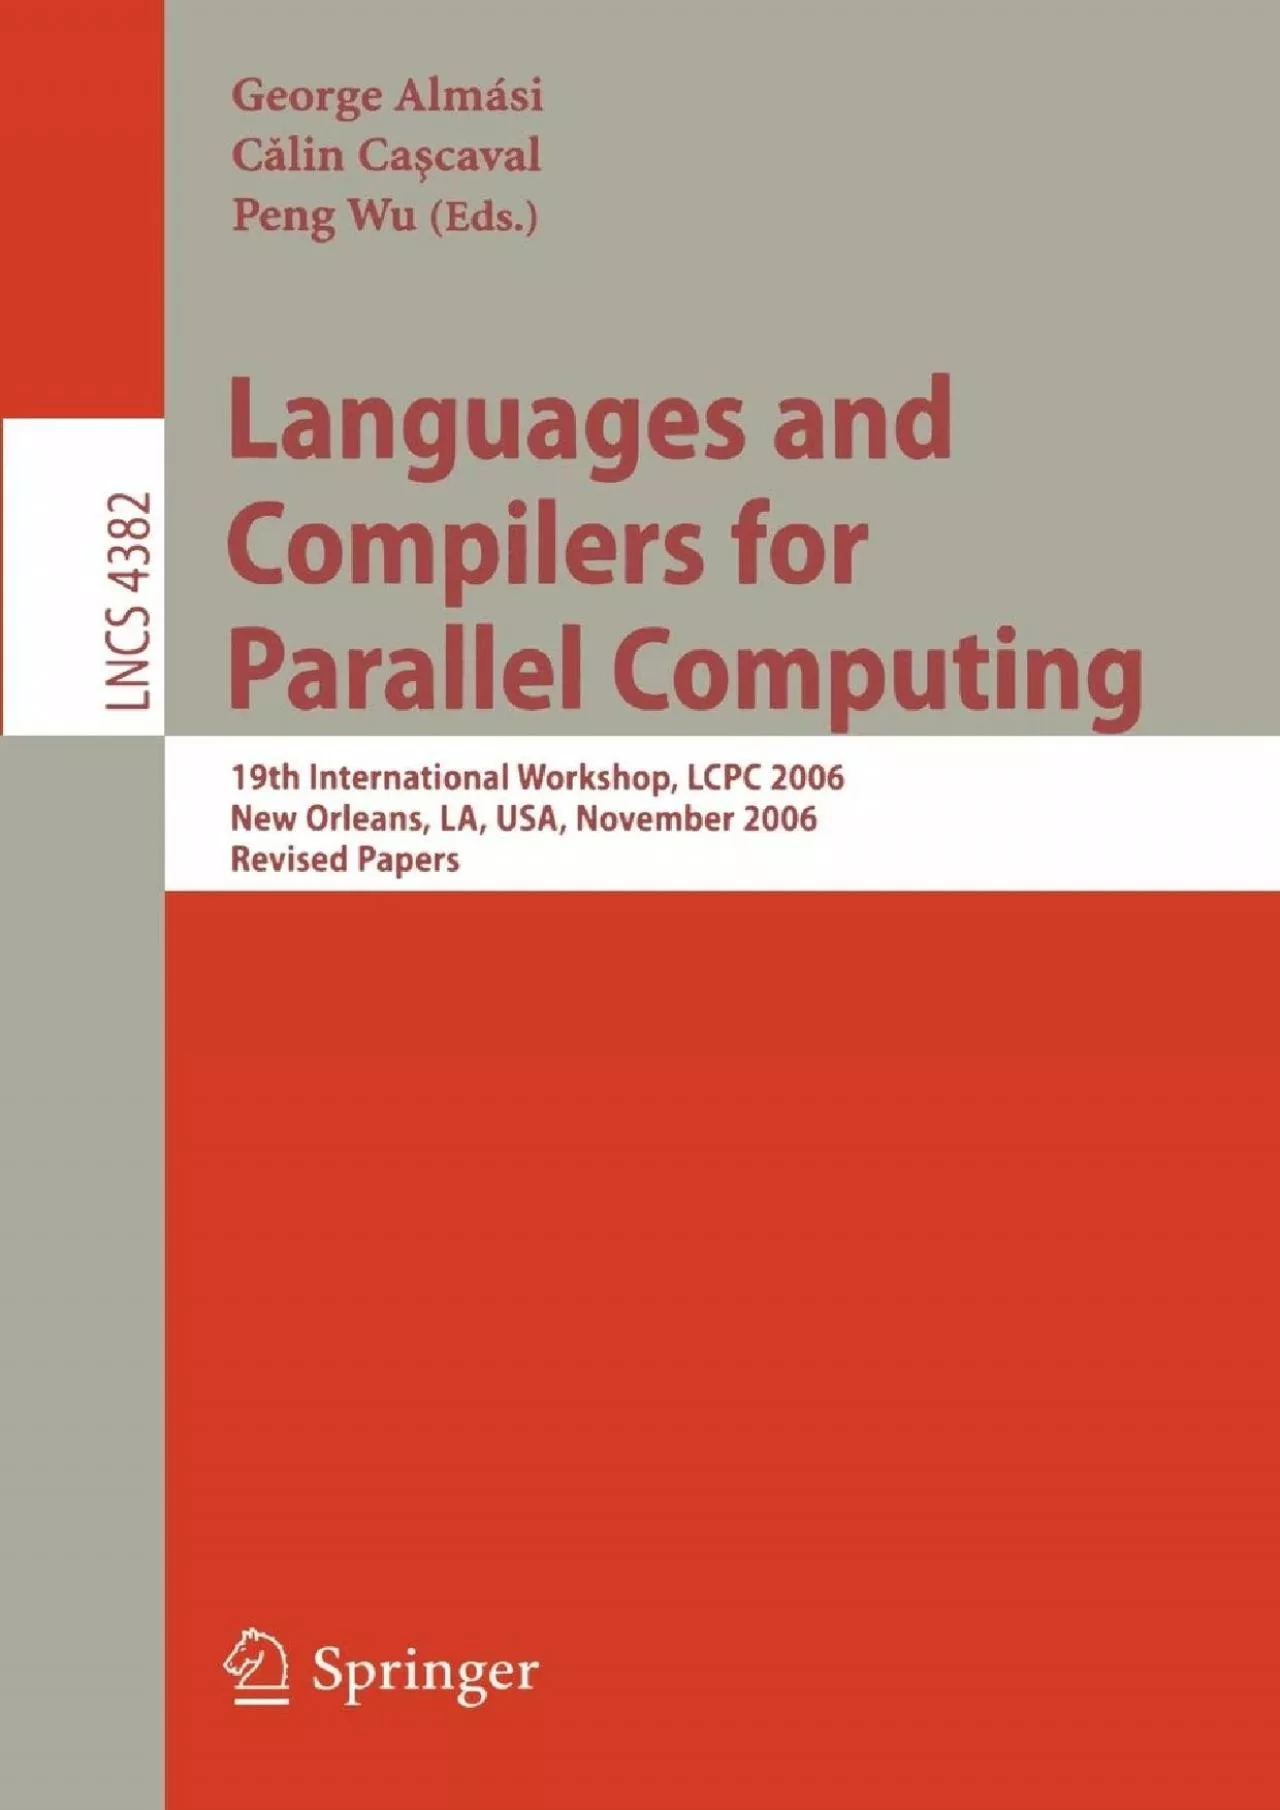 [READING BOOK]-Languages and Compilers for Parallel Computing: 19th International Workshop,